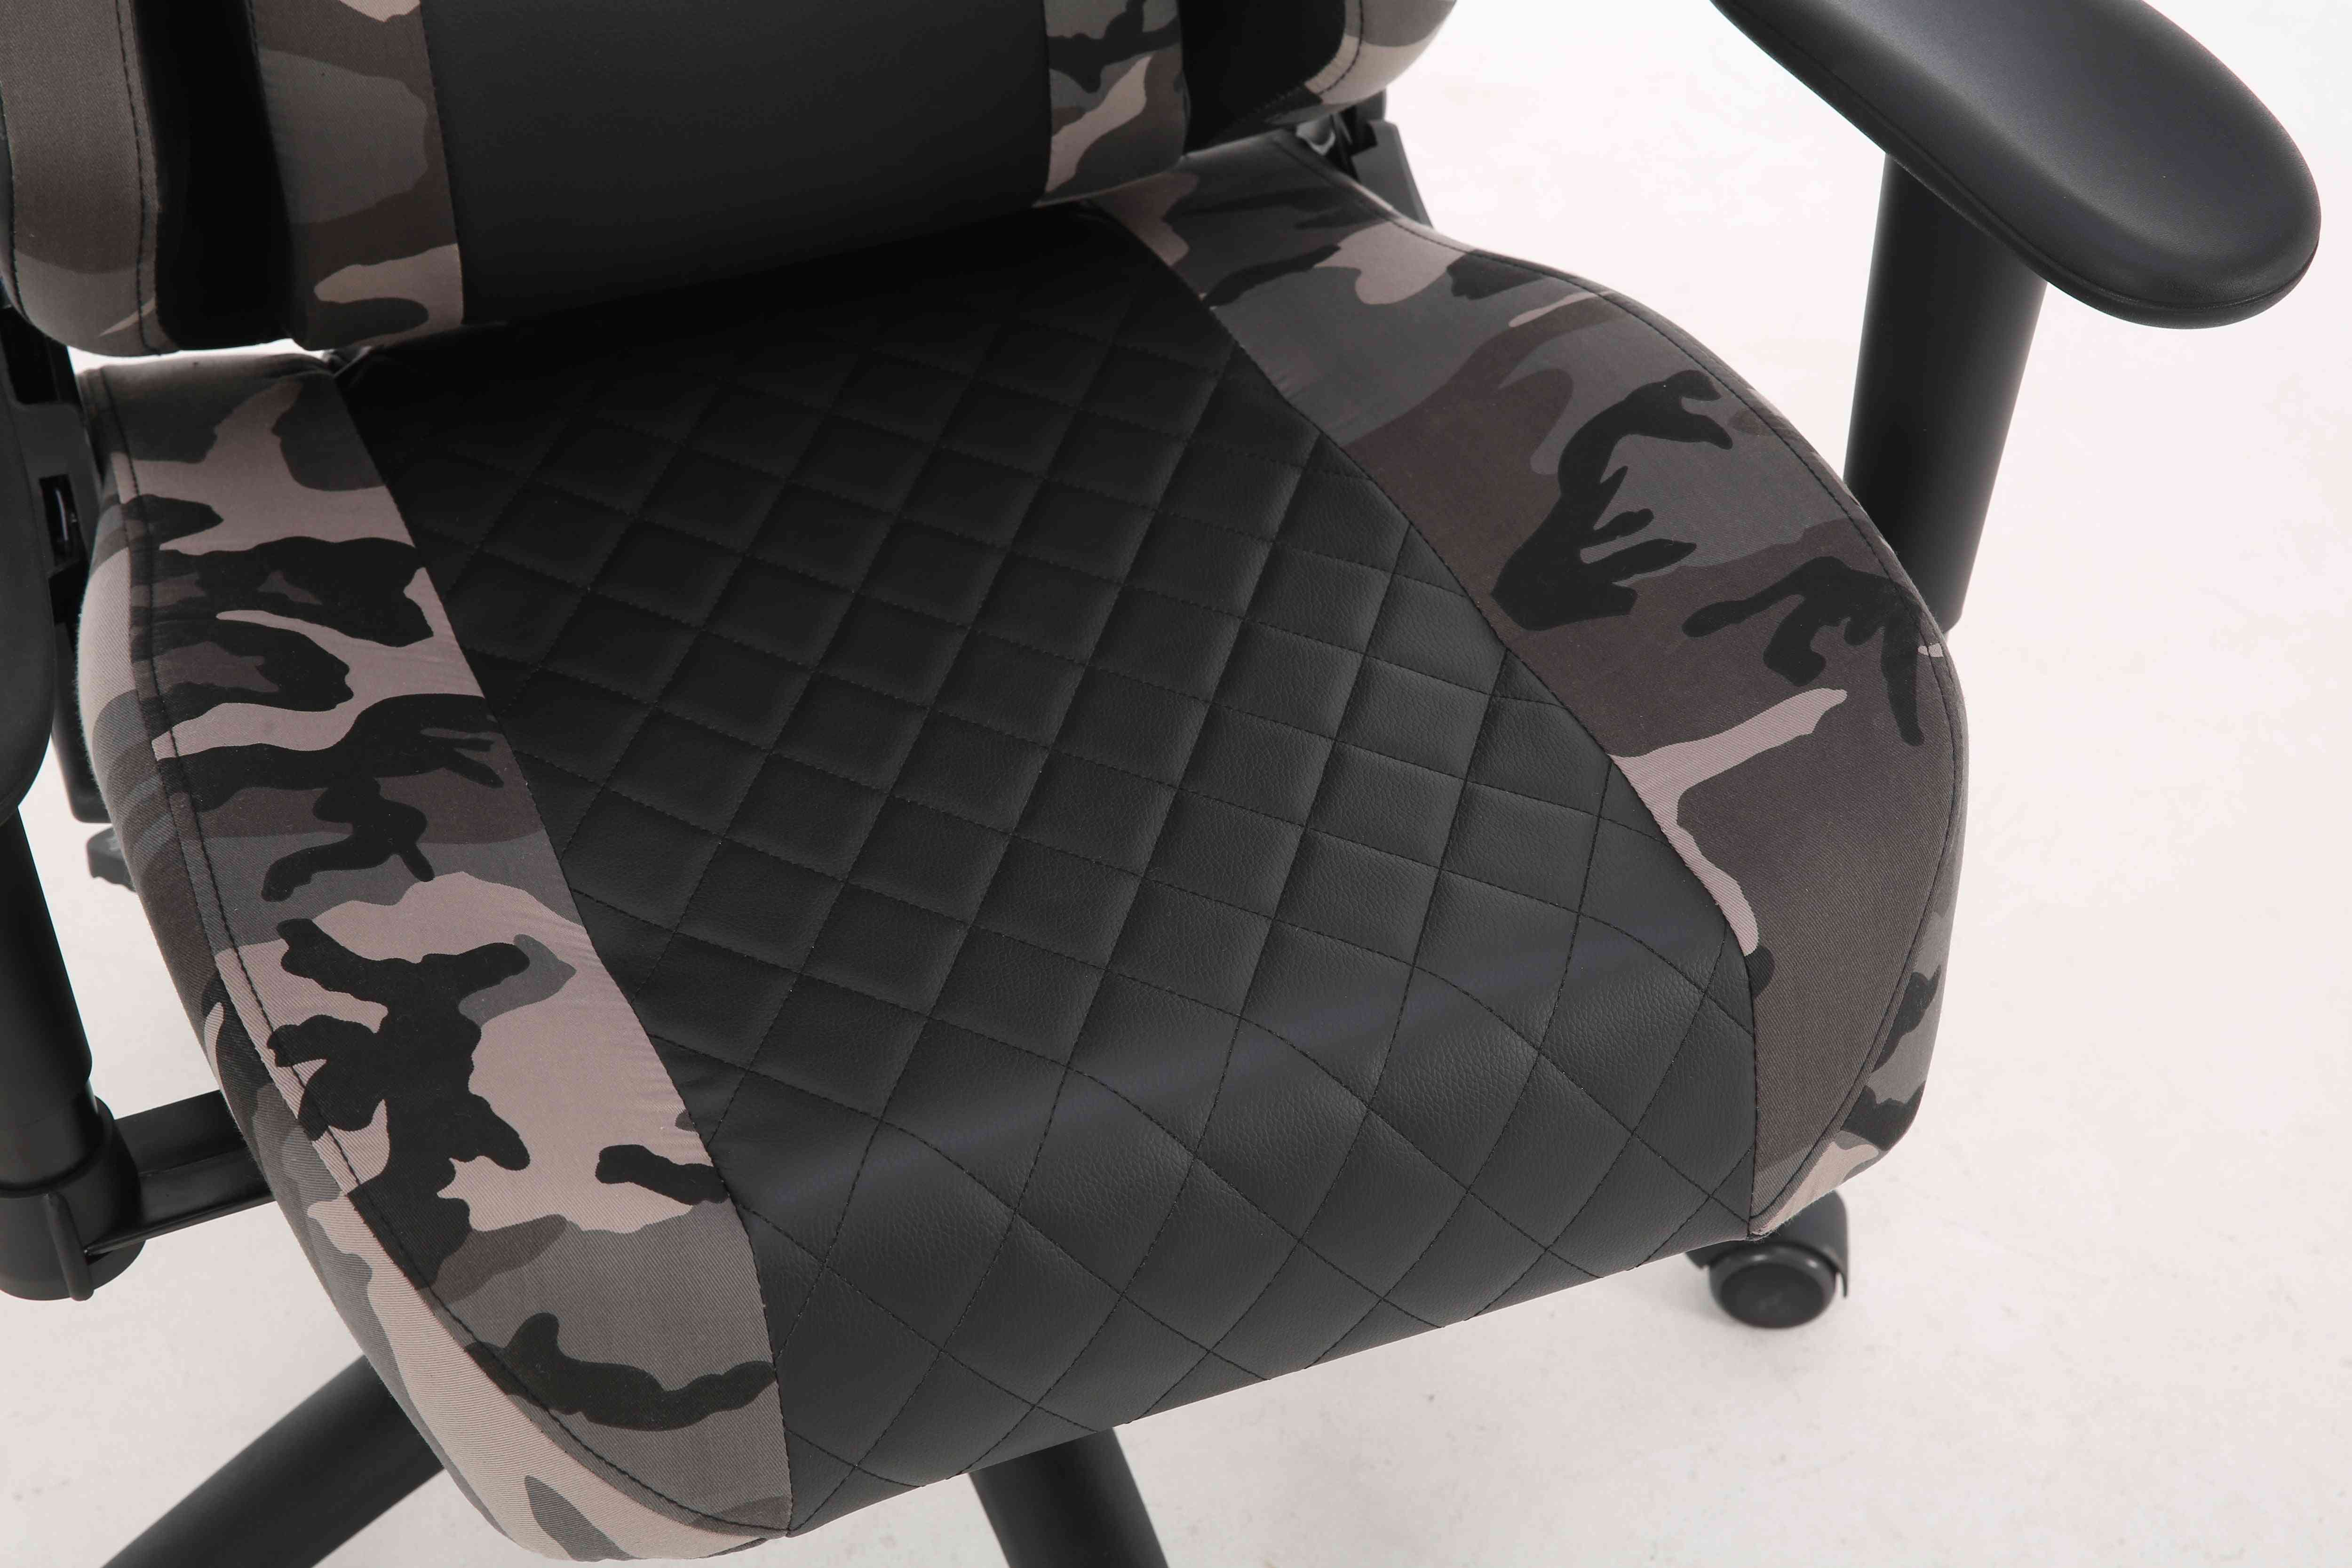 Ergonomically Designed Gaming Rotating E-sport Chair With Headrest And Waist Pillow